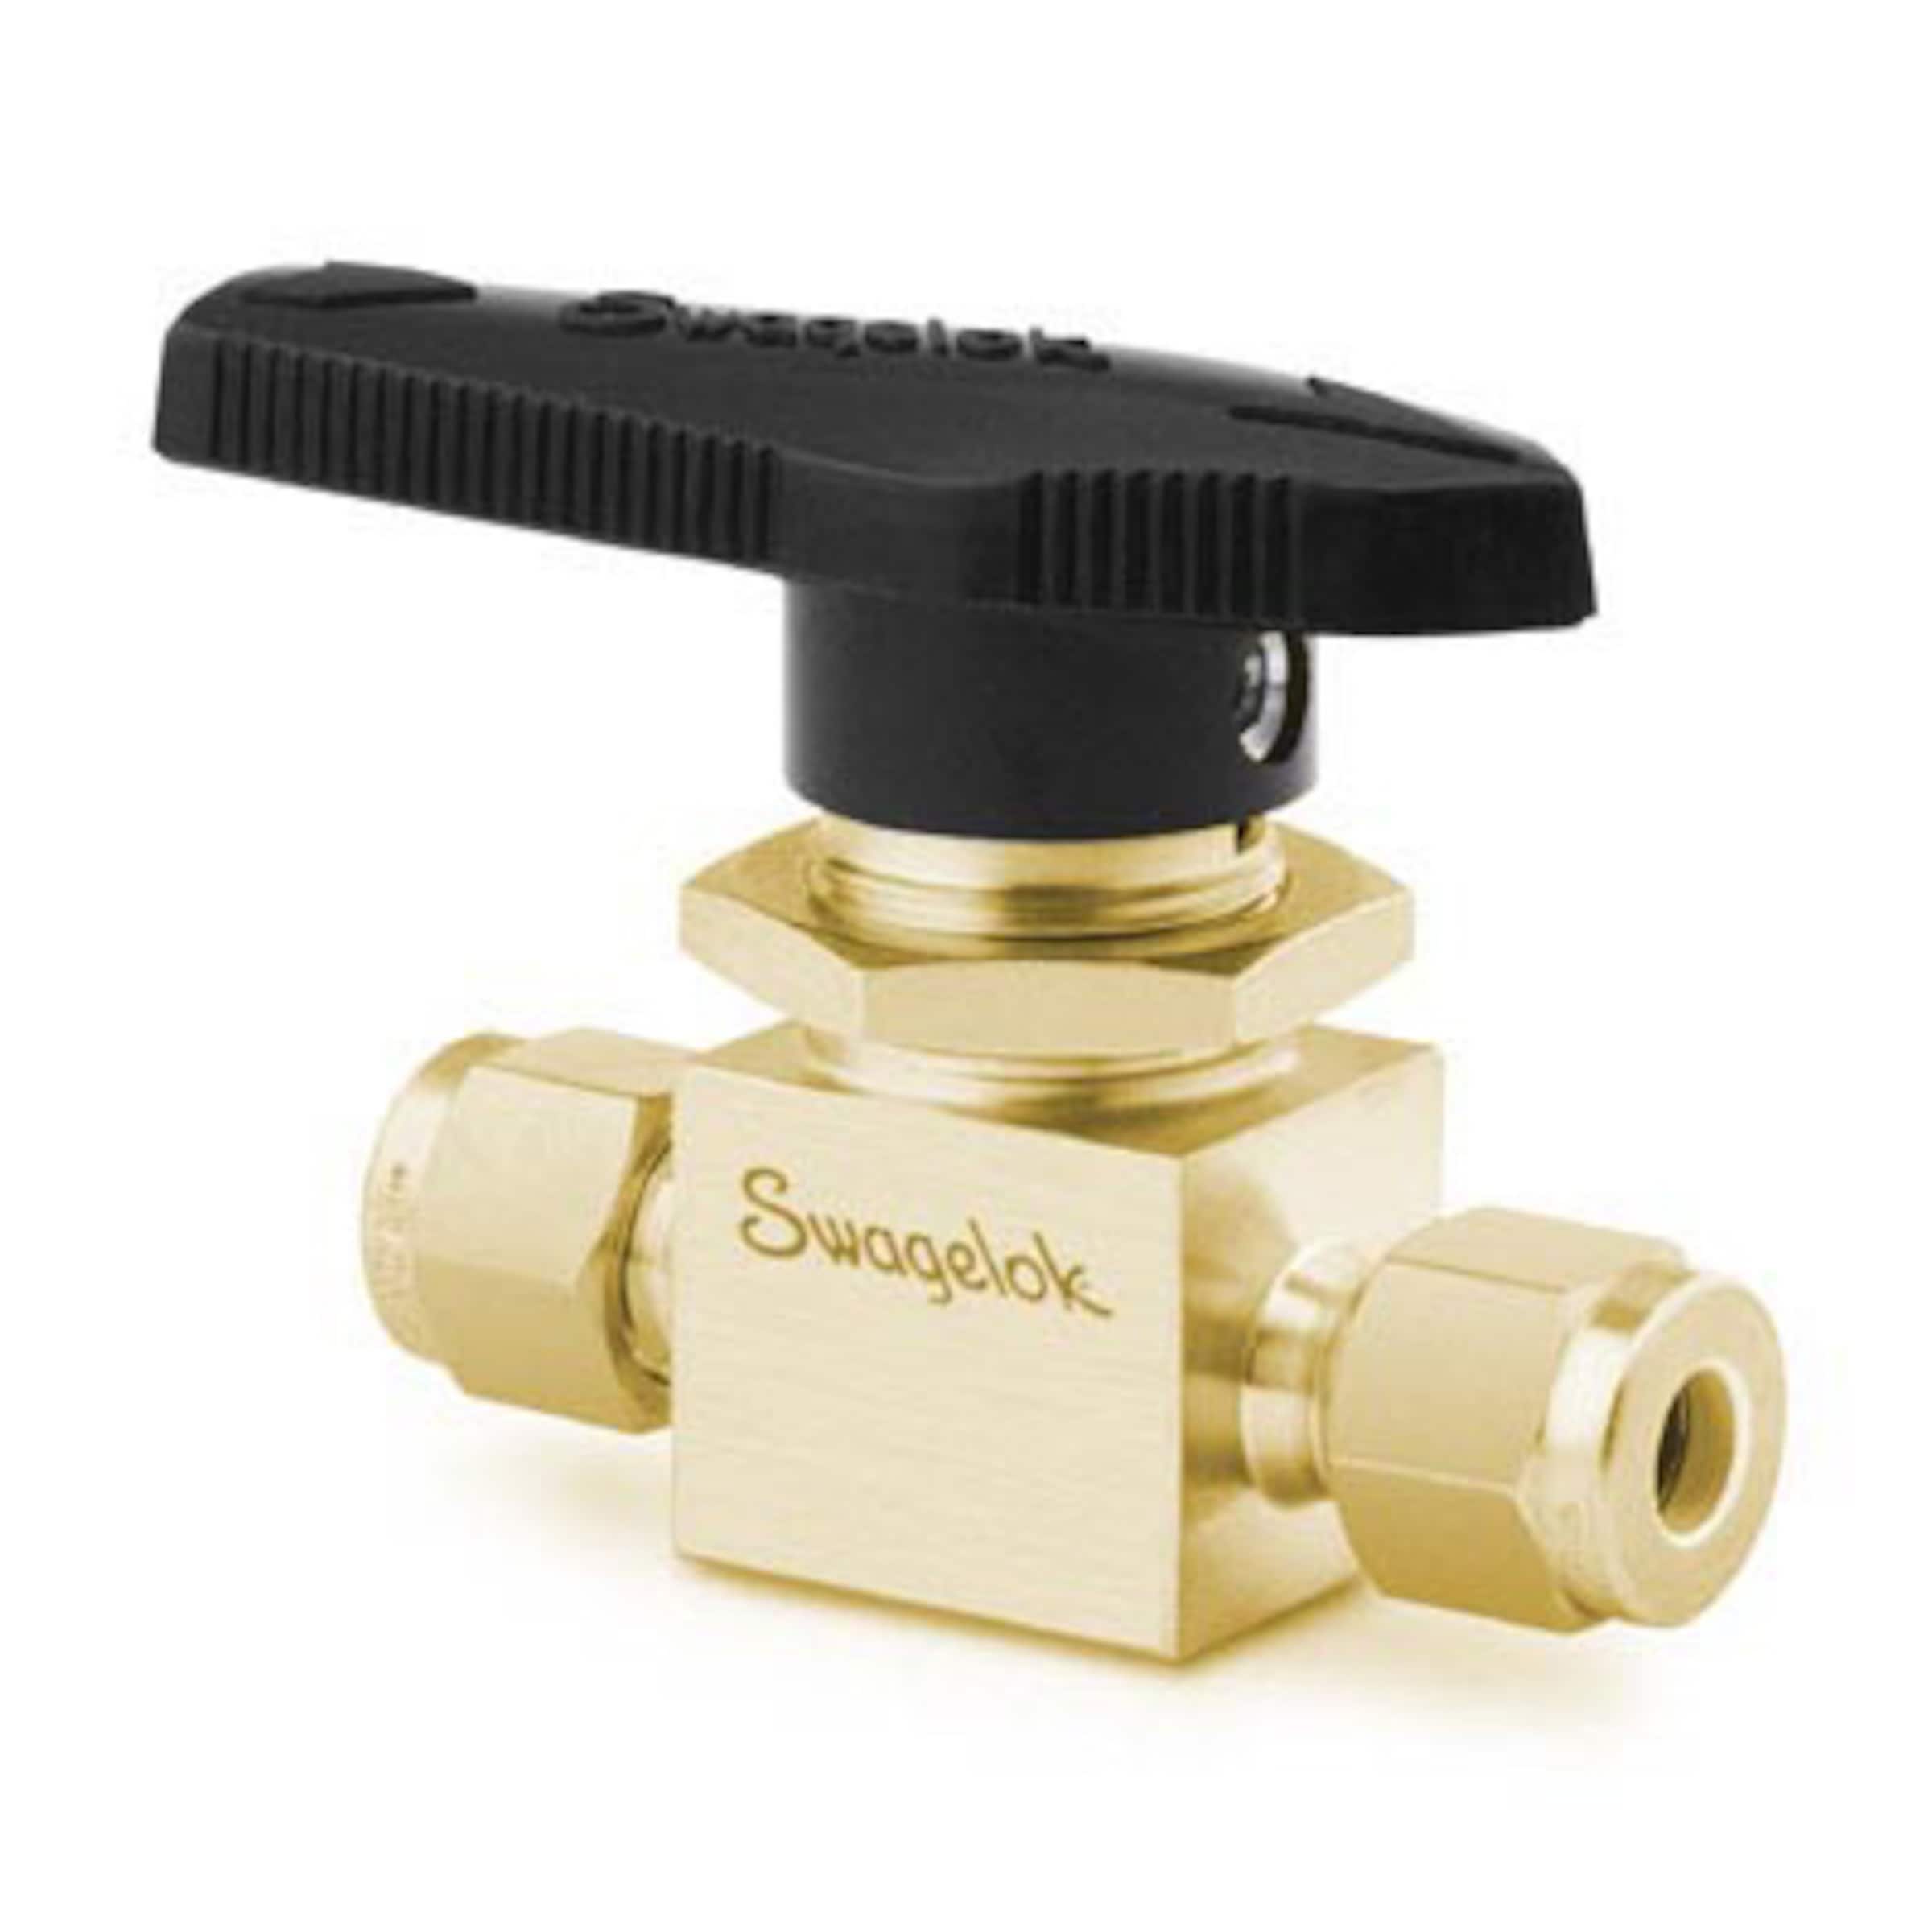 Brass 1-Piece 40 Series Ball Valve, 0.2 Cv, 1/8 in. Swagelok Tube Fitting, One-Piece Instrumentation Ball Valves, 40G and 40 Series, Ball and  Quarter-Turn Plug Valves, Valves, All Products